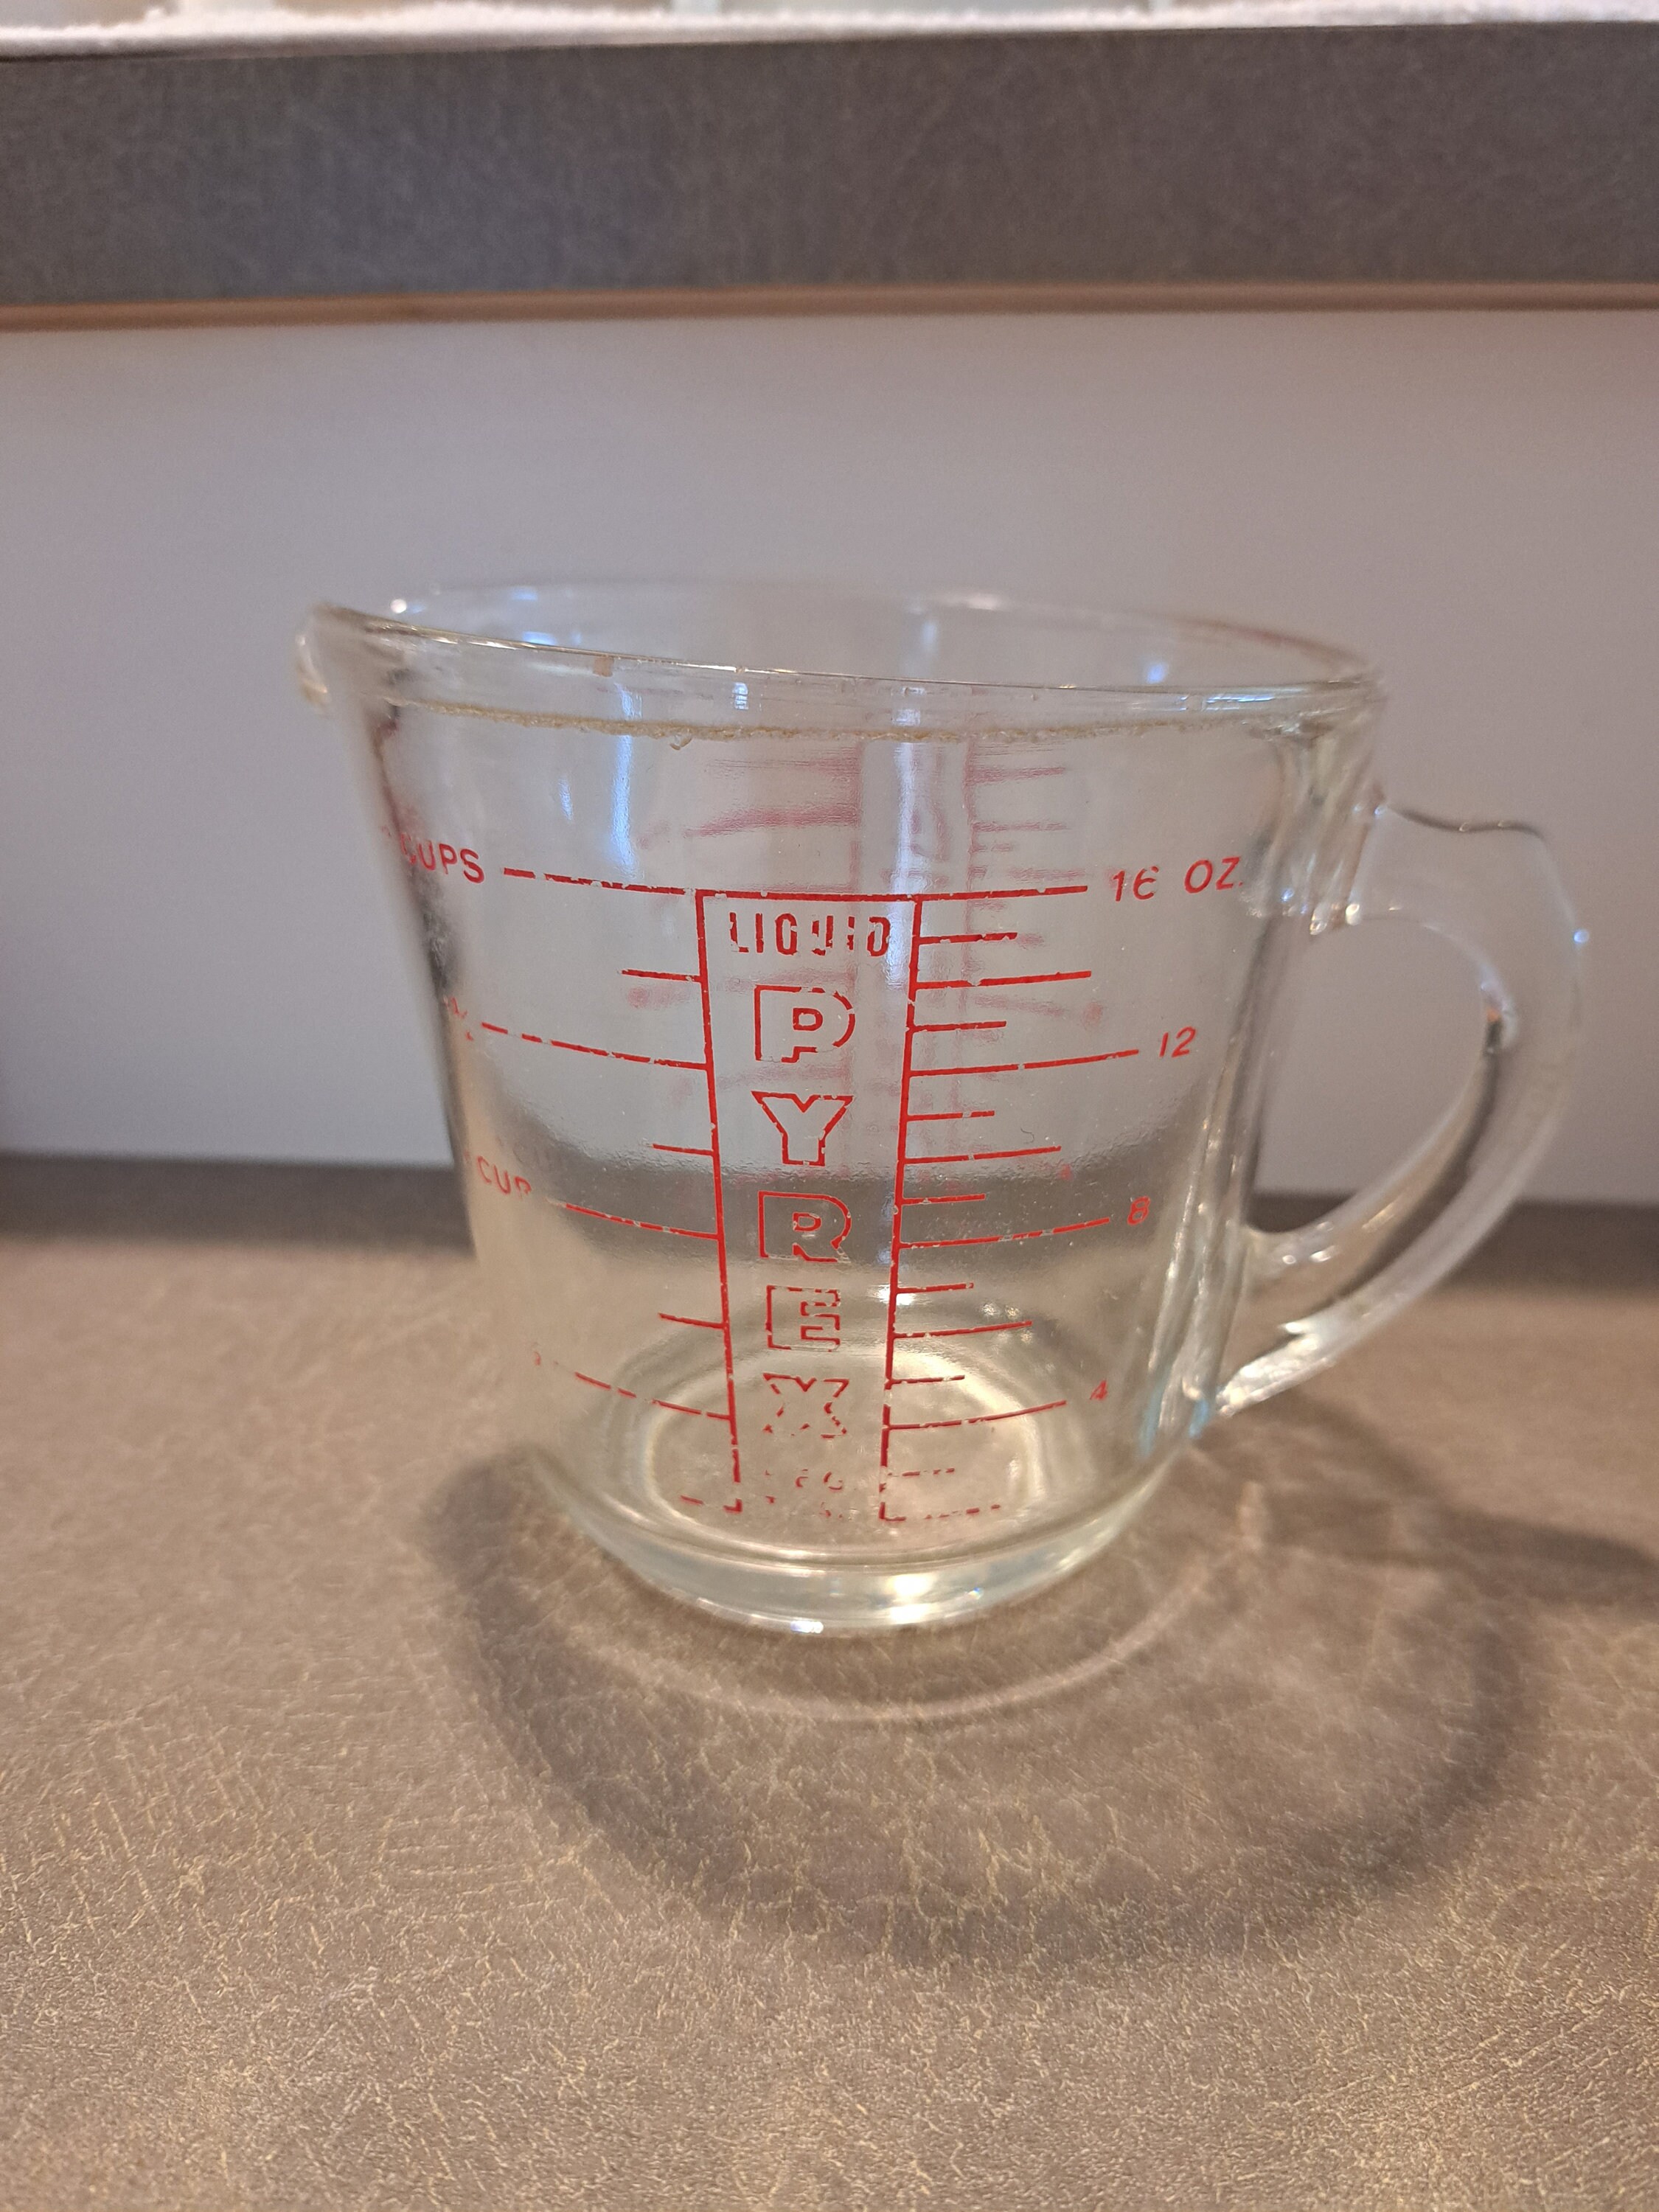 Pyrex 4 Cup 32 Oz 1 L Metric Glass Microwavable Mixing Measuring Cup USA  Made